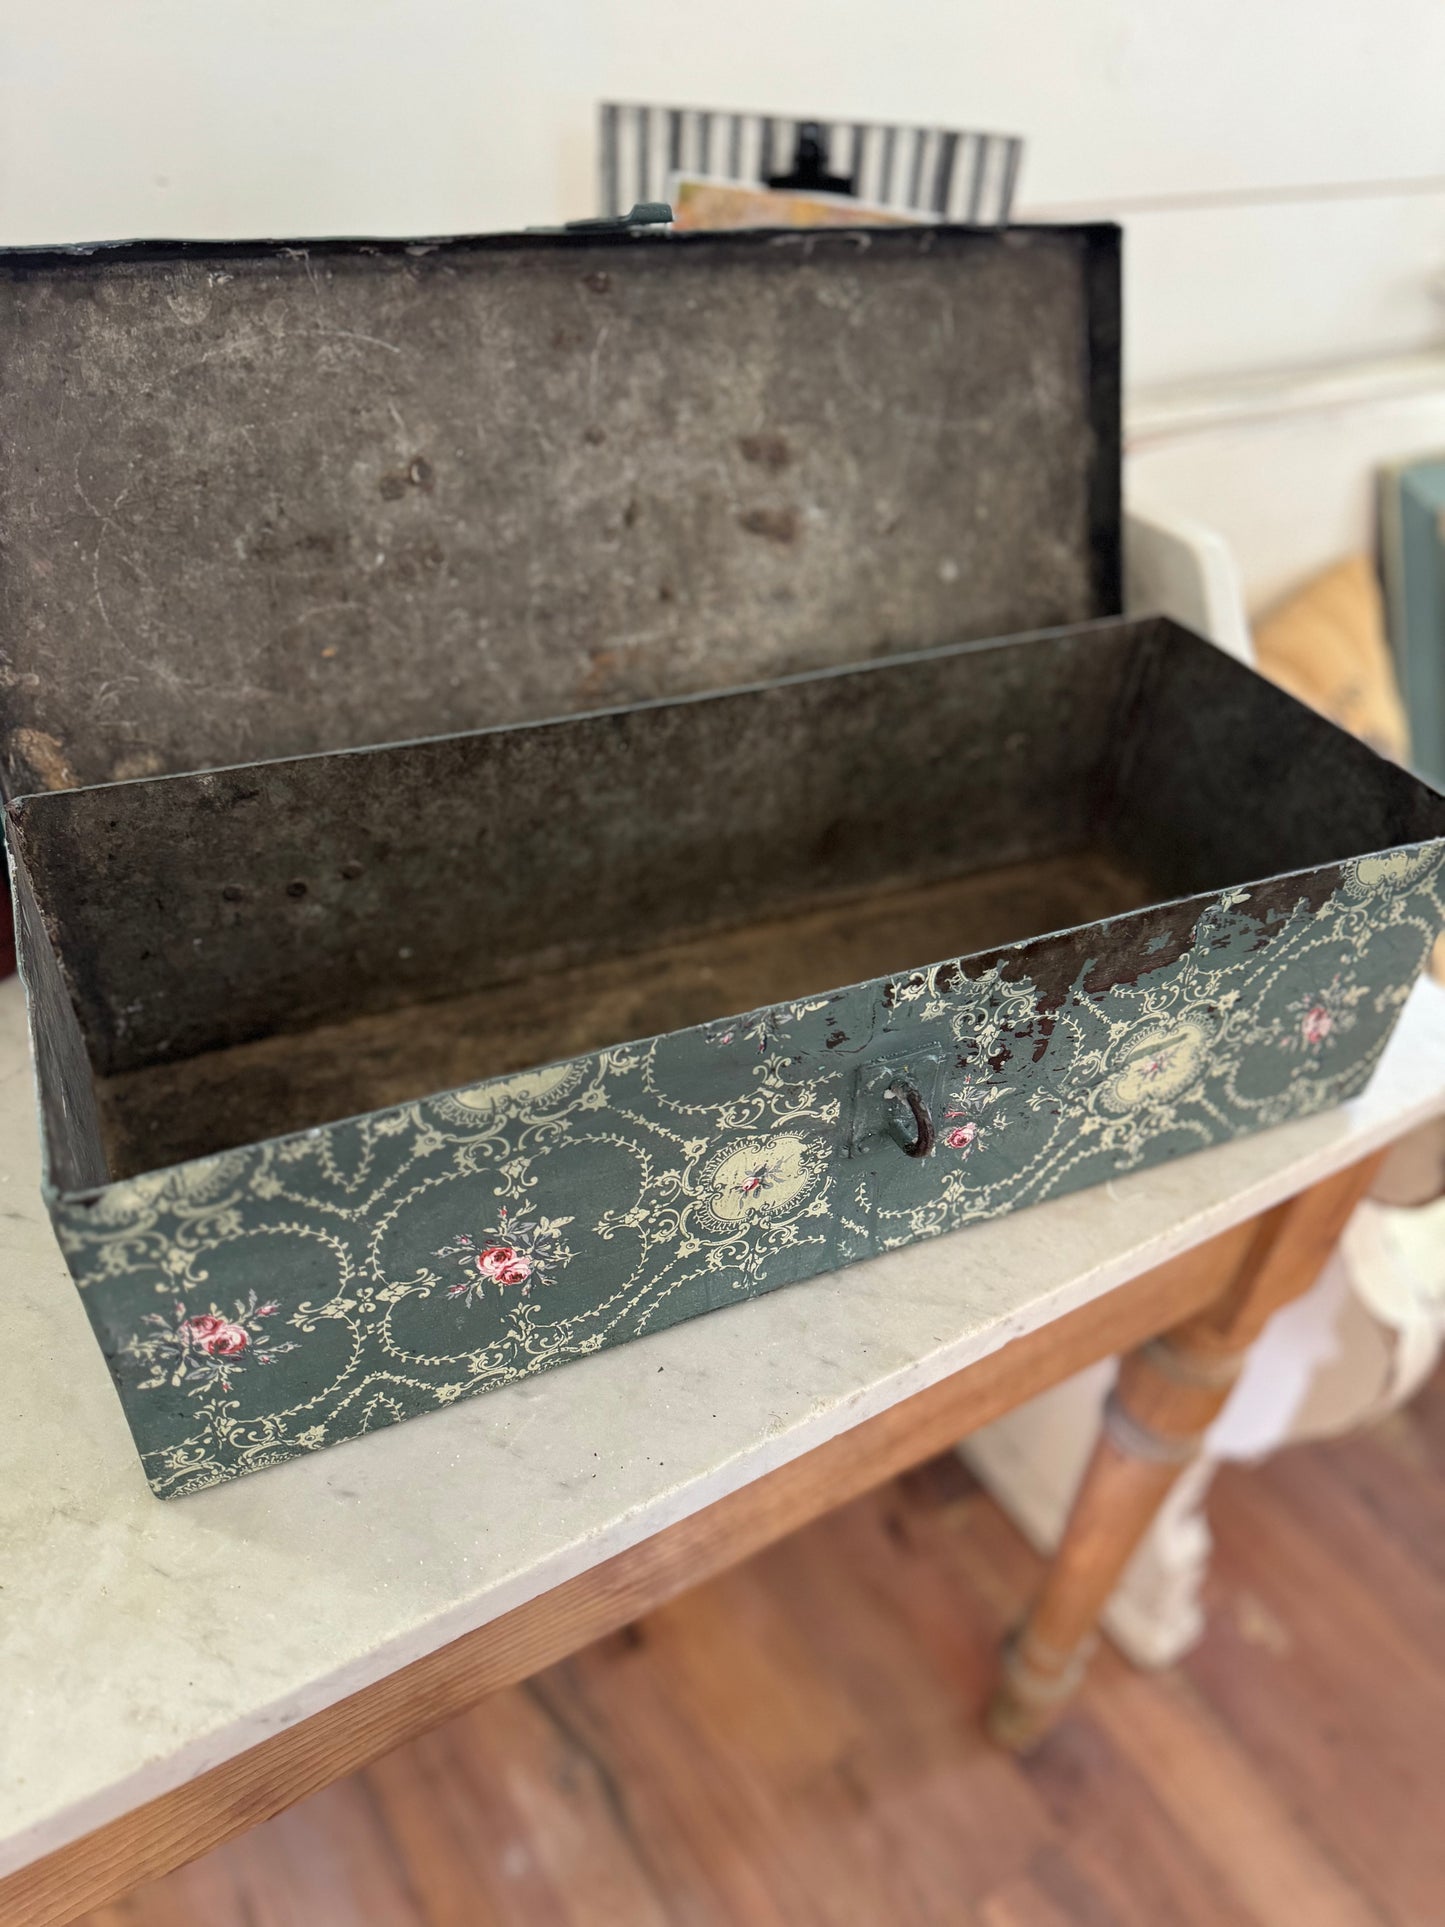 Chippy Painted Antique tool box - heavy gauge